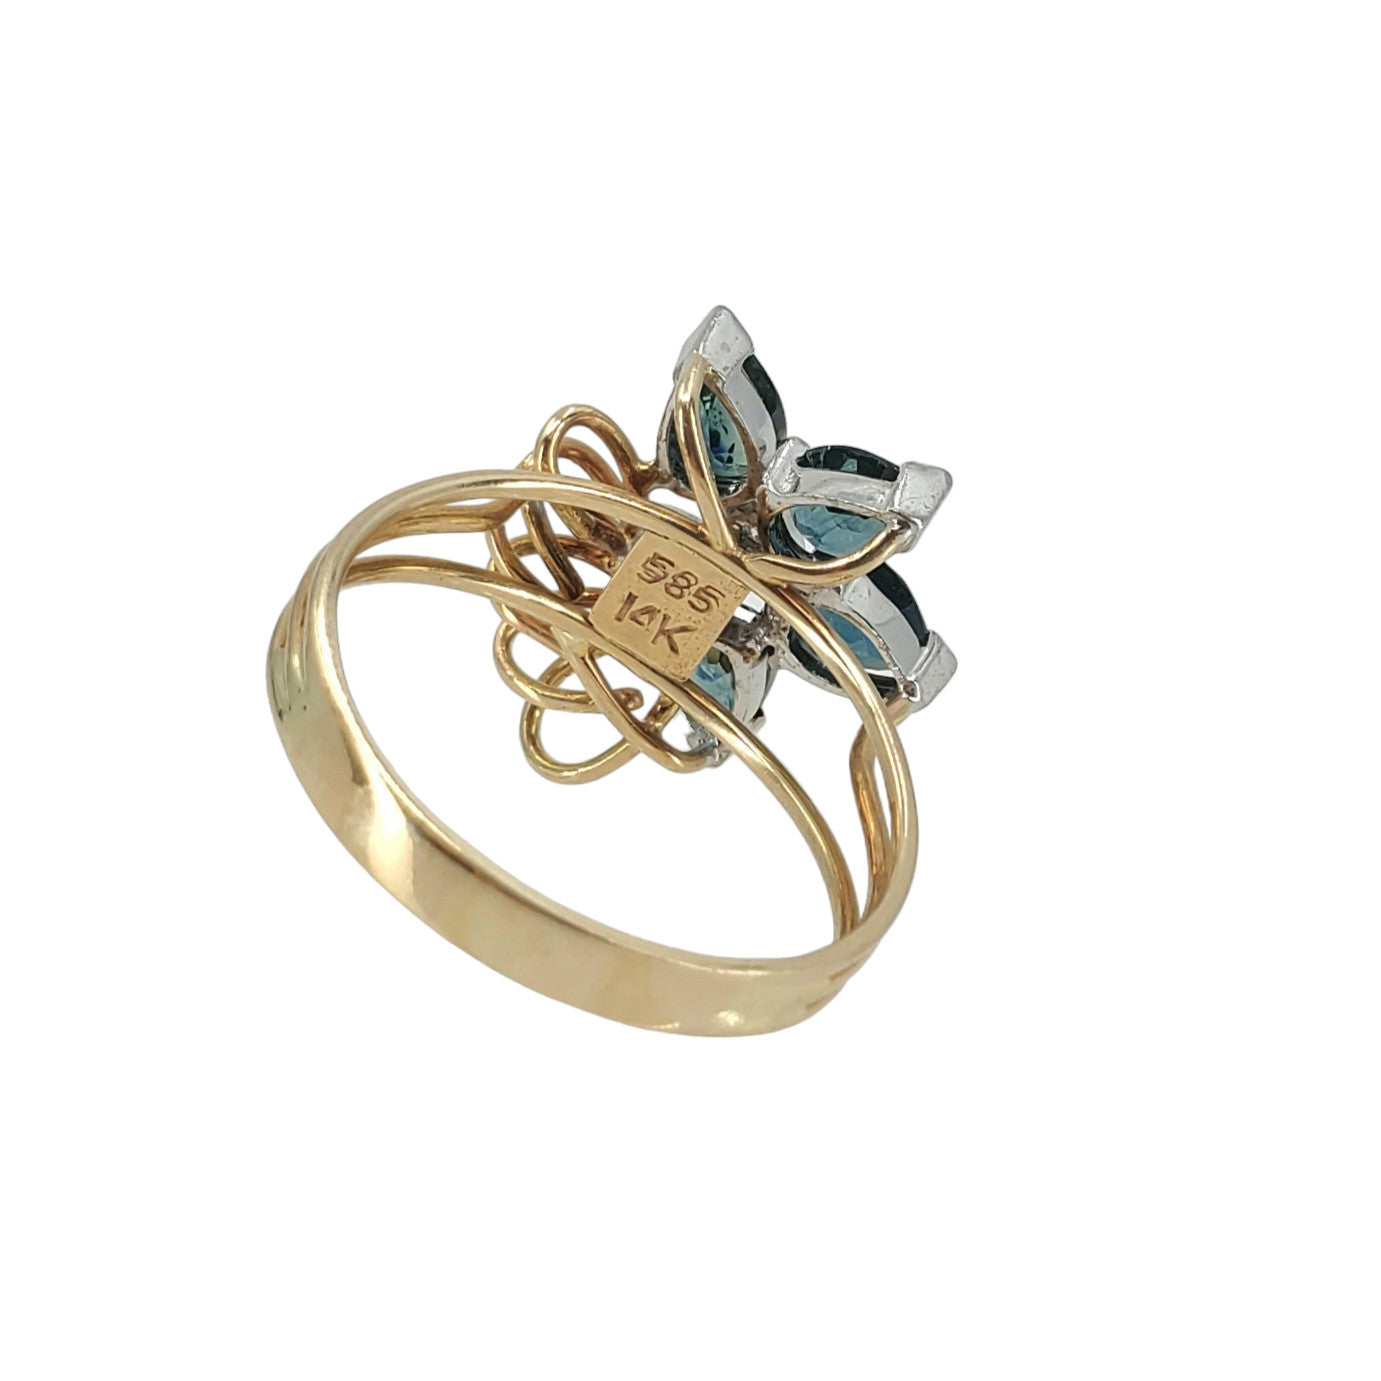 Two Tone Gold Teal Sapphire and Diamond Ring